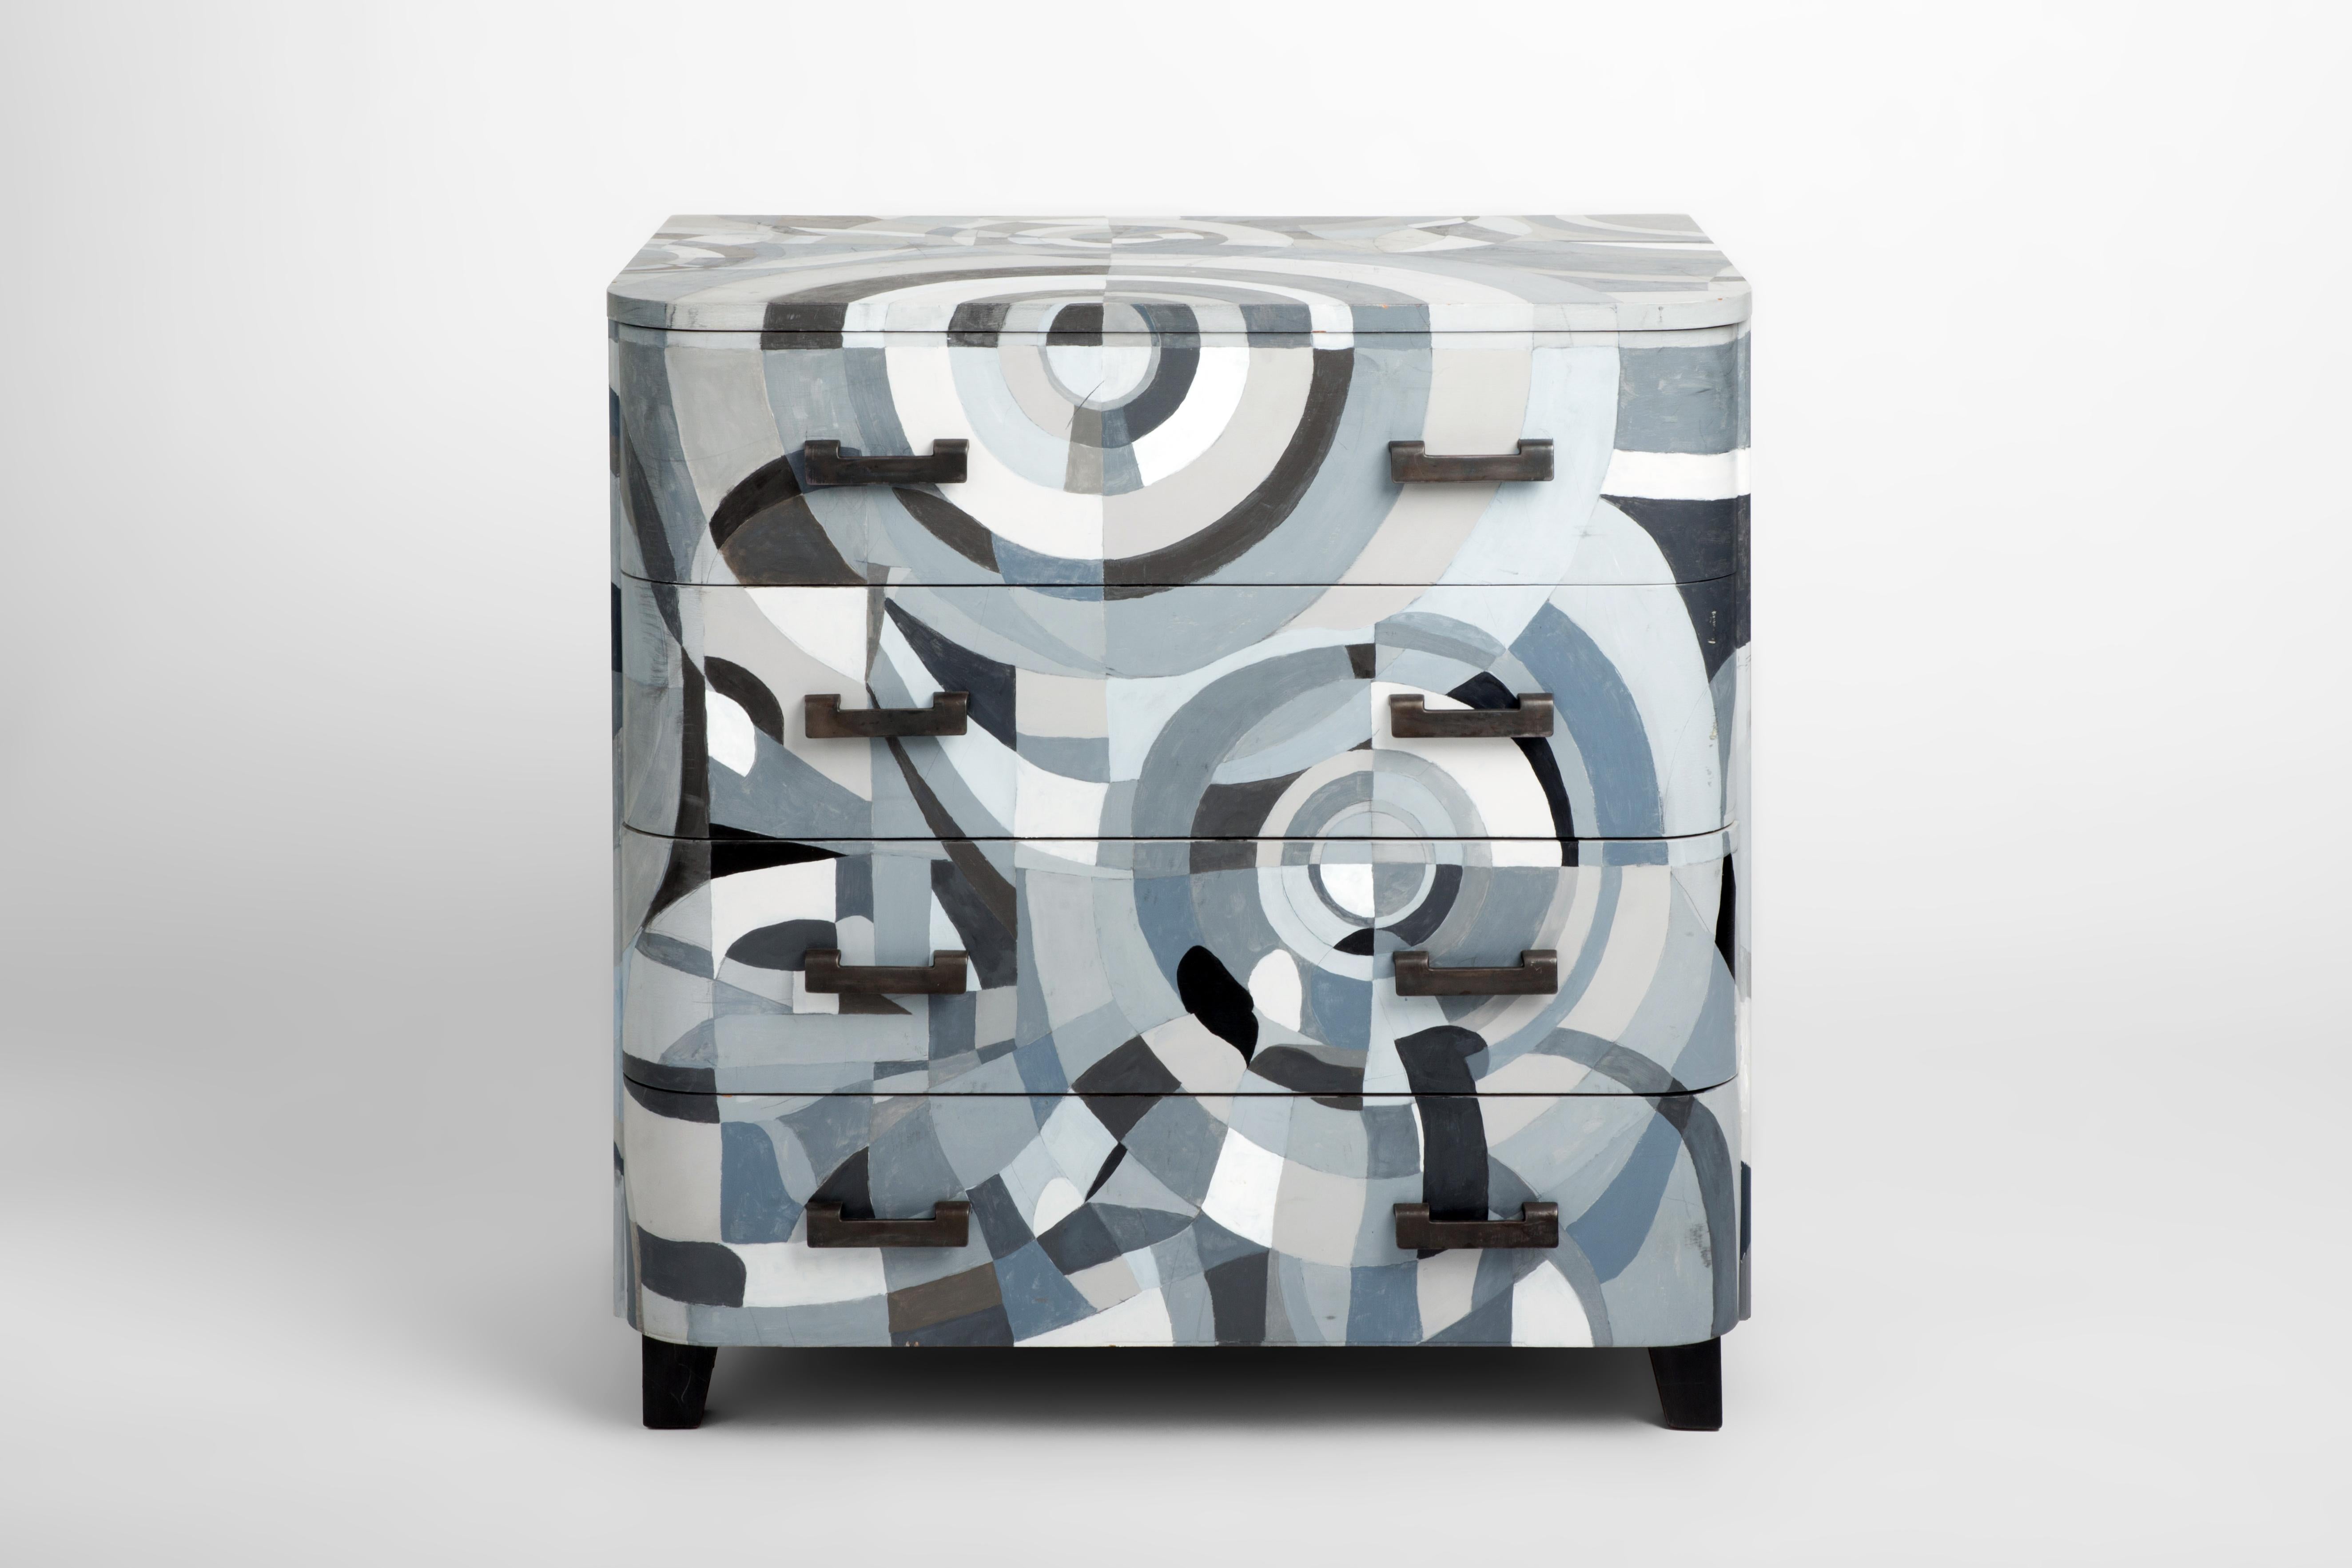 A simple midcentury cabinet with curved corners reminiscent of Art Deco forms is re-imagined by decorative painter Dean Barger, who adapted a Sonia Delaunay painting, wrapping the piece in the cool gray tones of a undulating and geometric pattern.